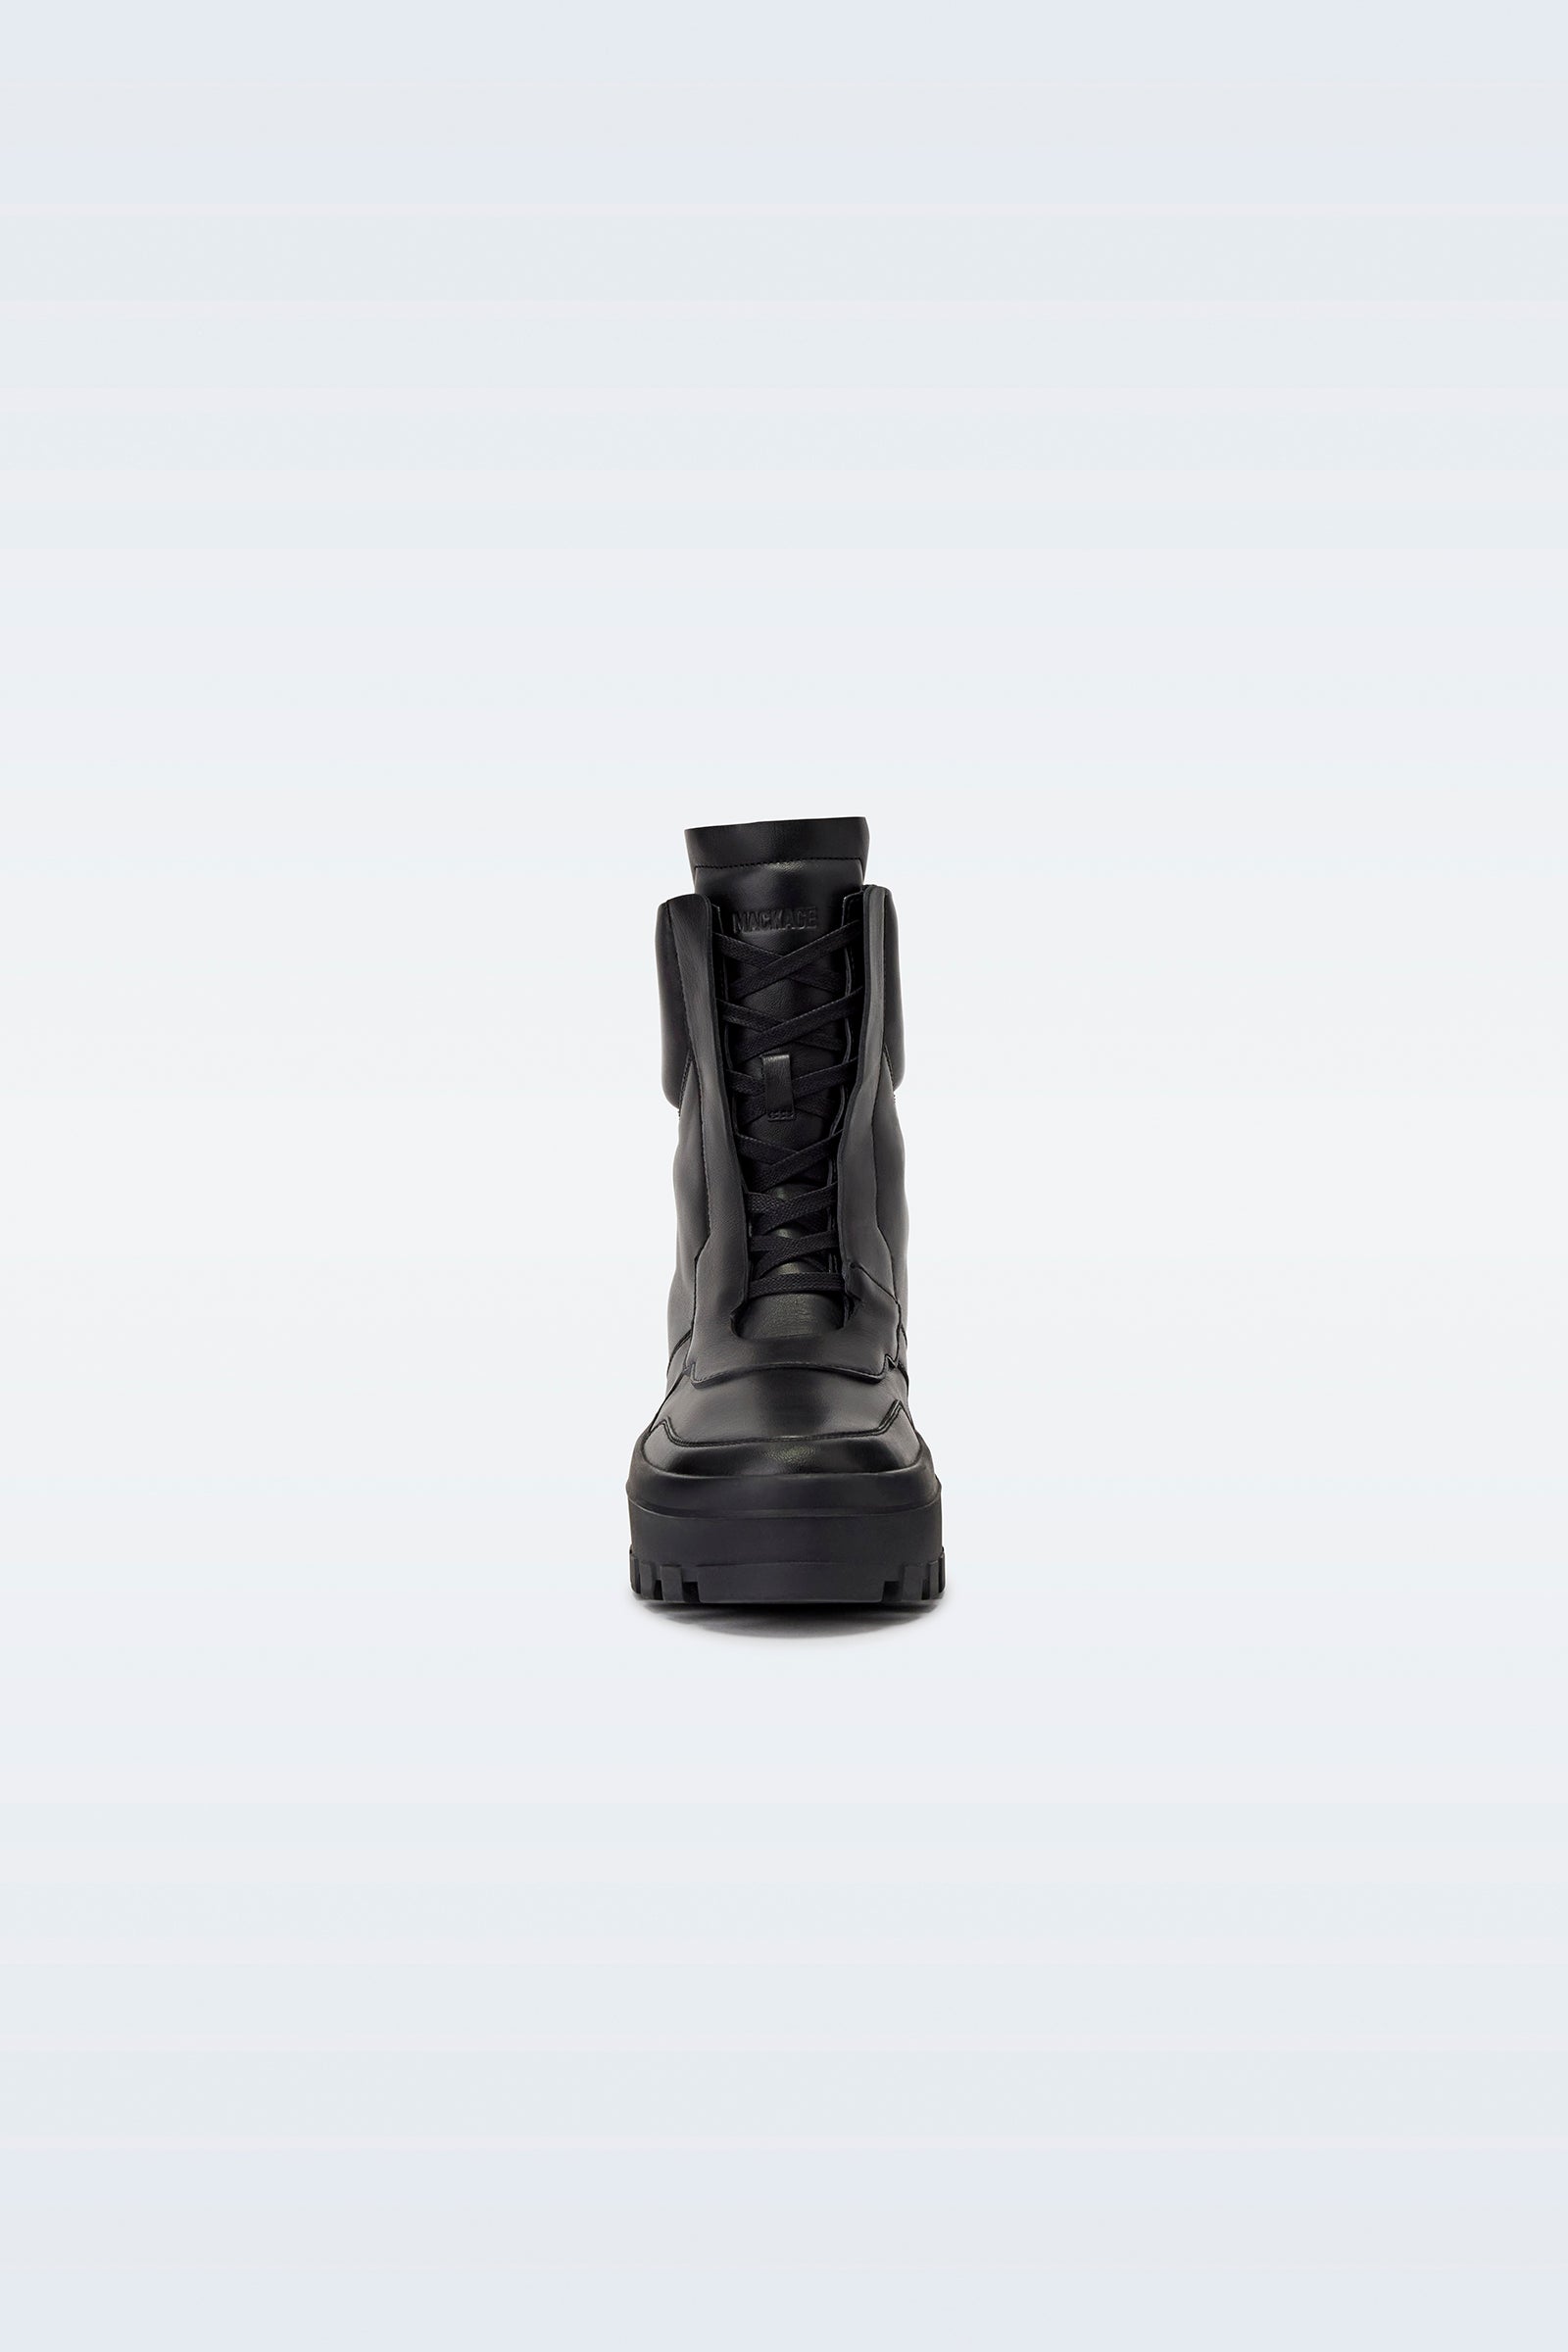 Ekon, Leather mid-calf lace-up boots for ladies | Mackage® Canada